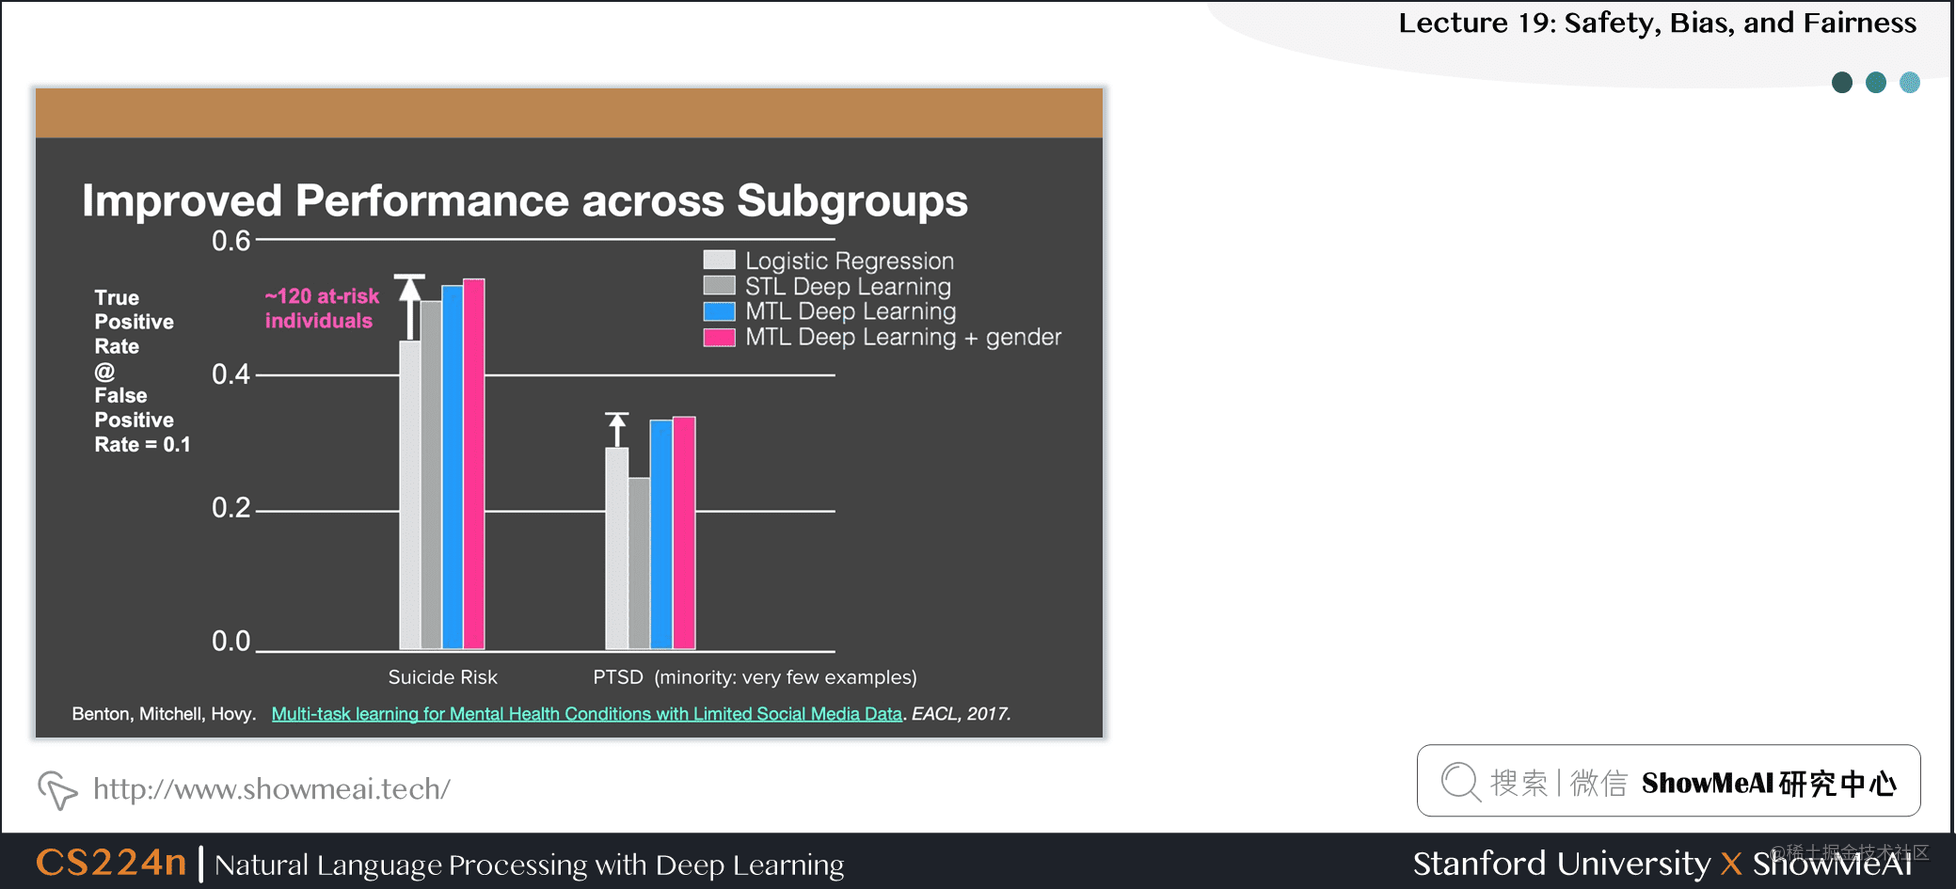 Improved Performance across Subgroups